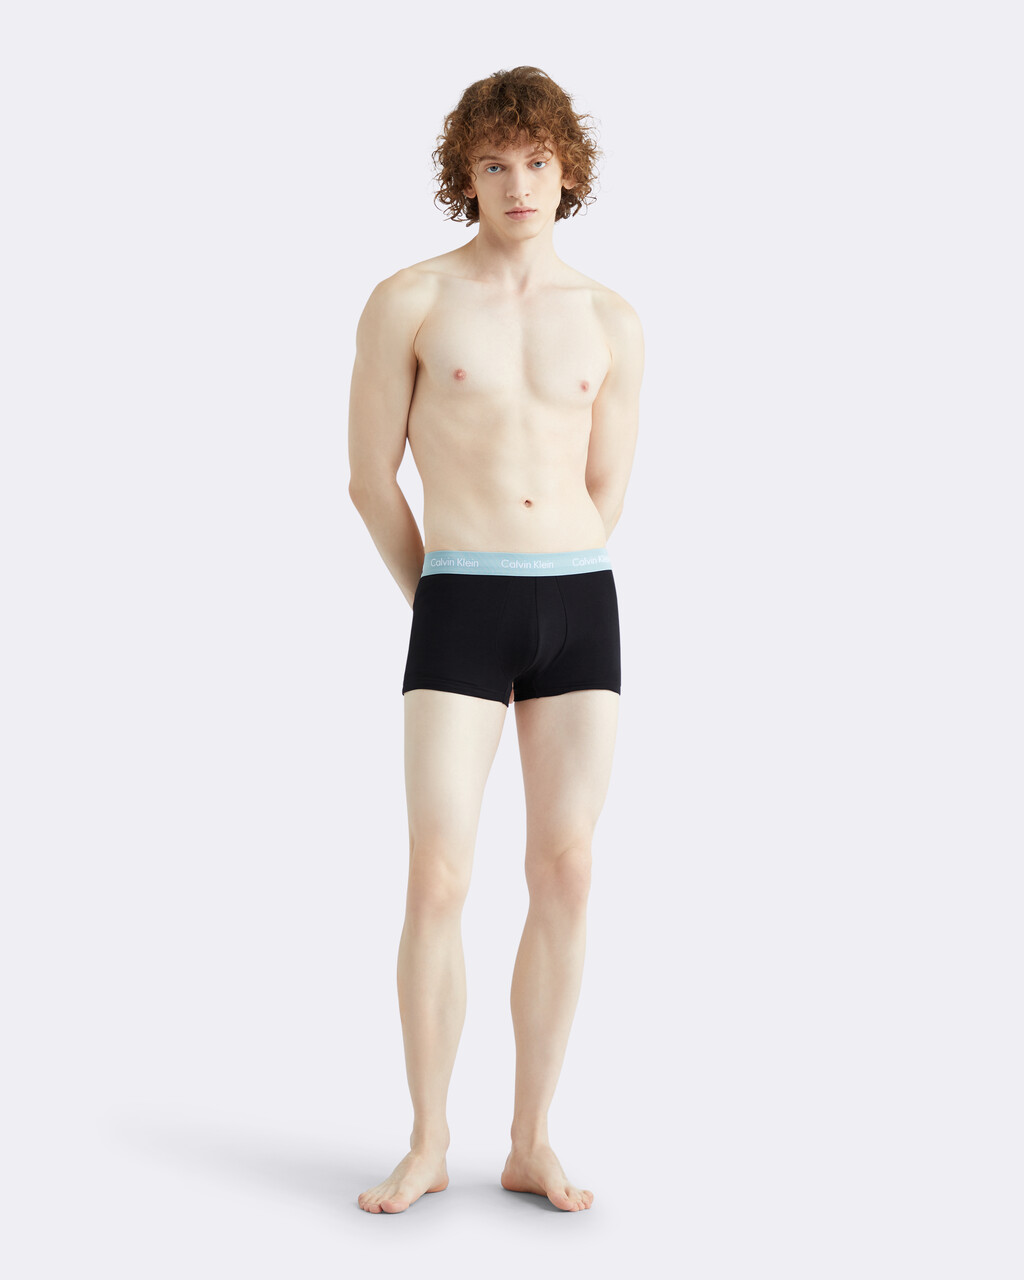 Cotton Stretch 3-Pack Low Rise Trunk